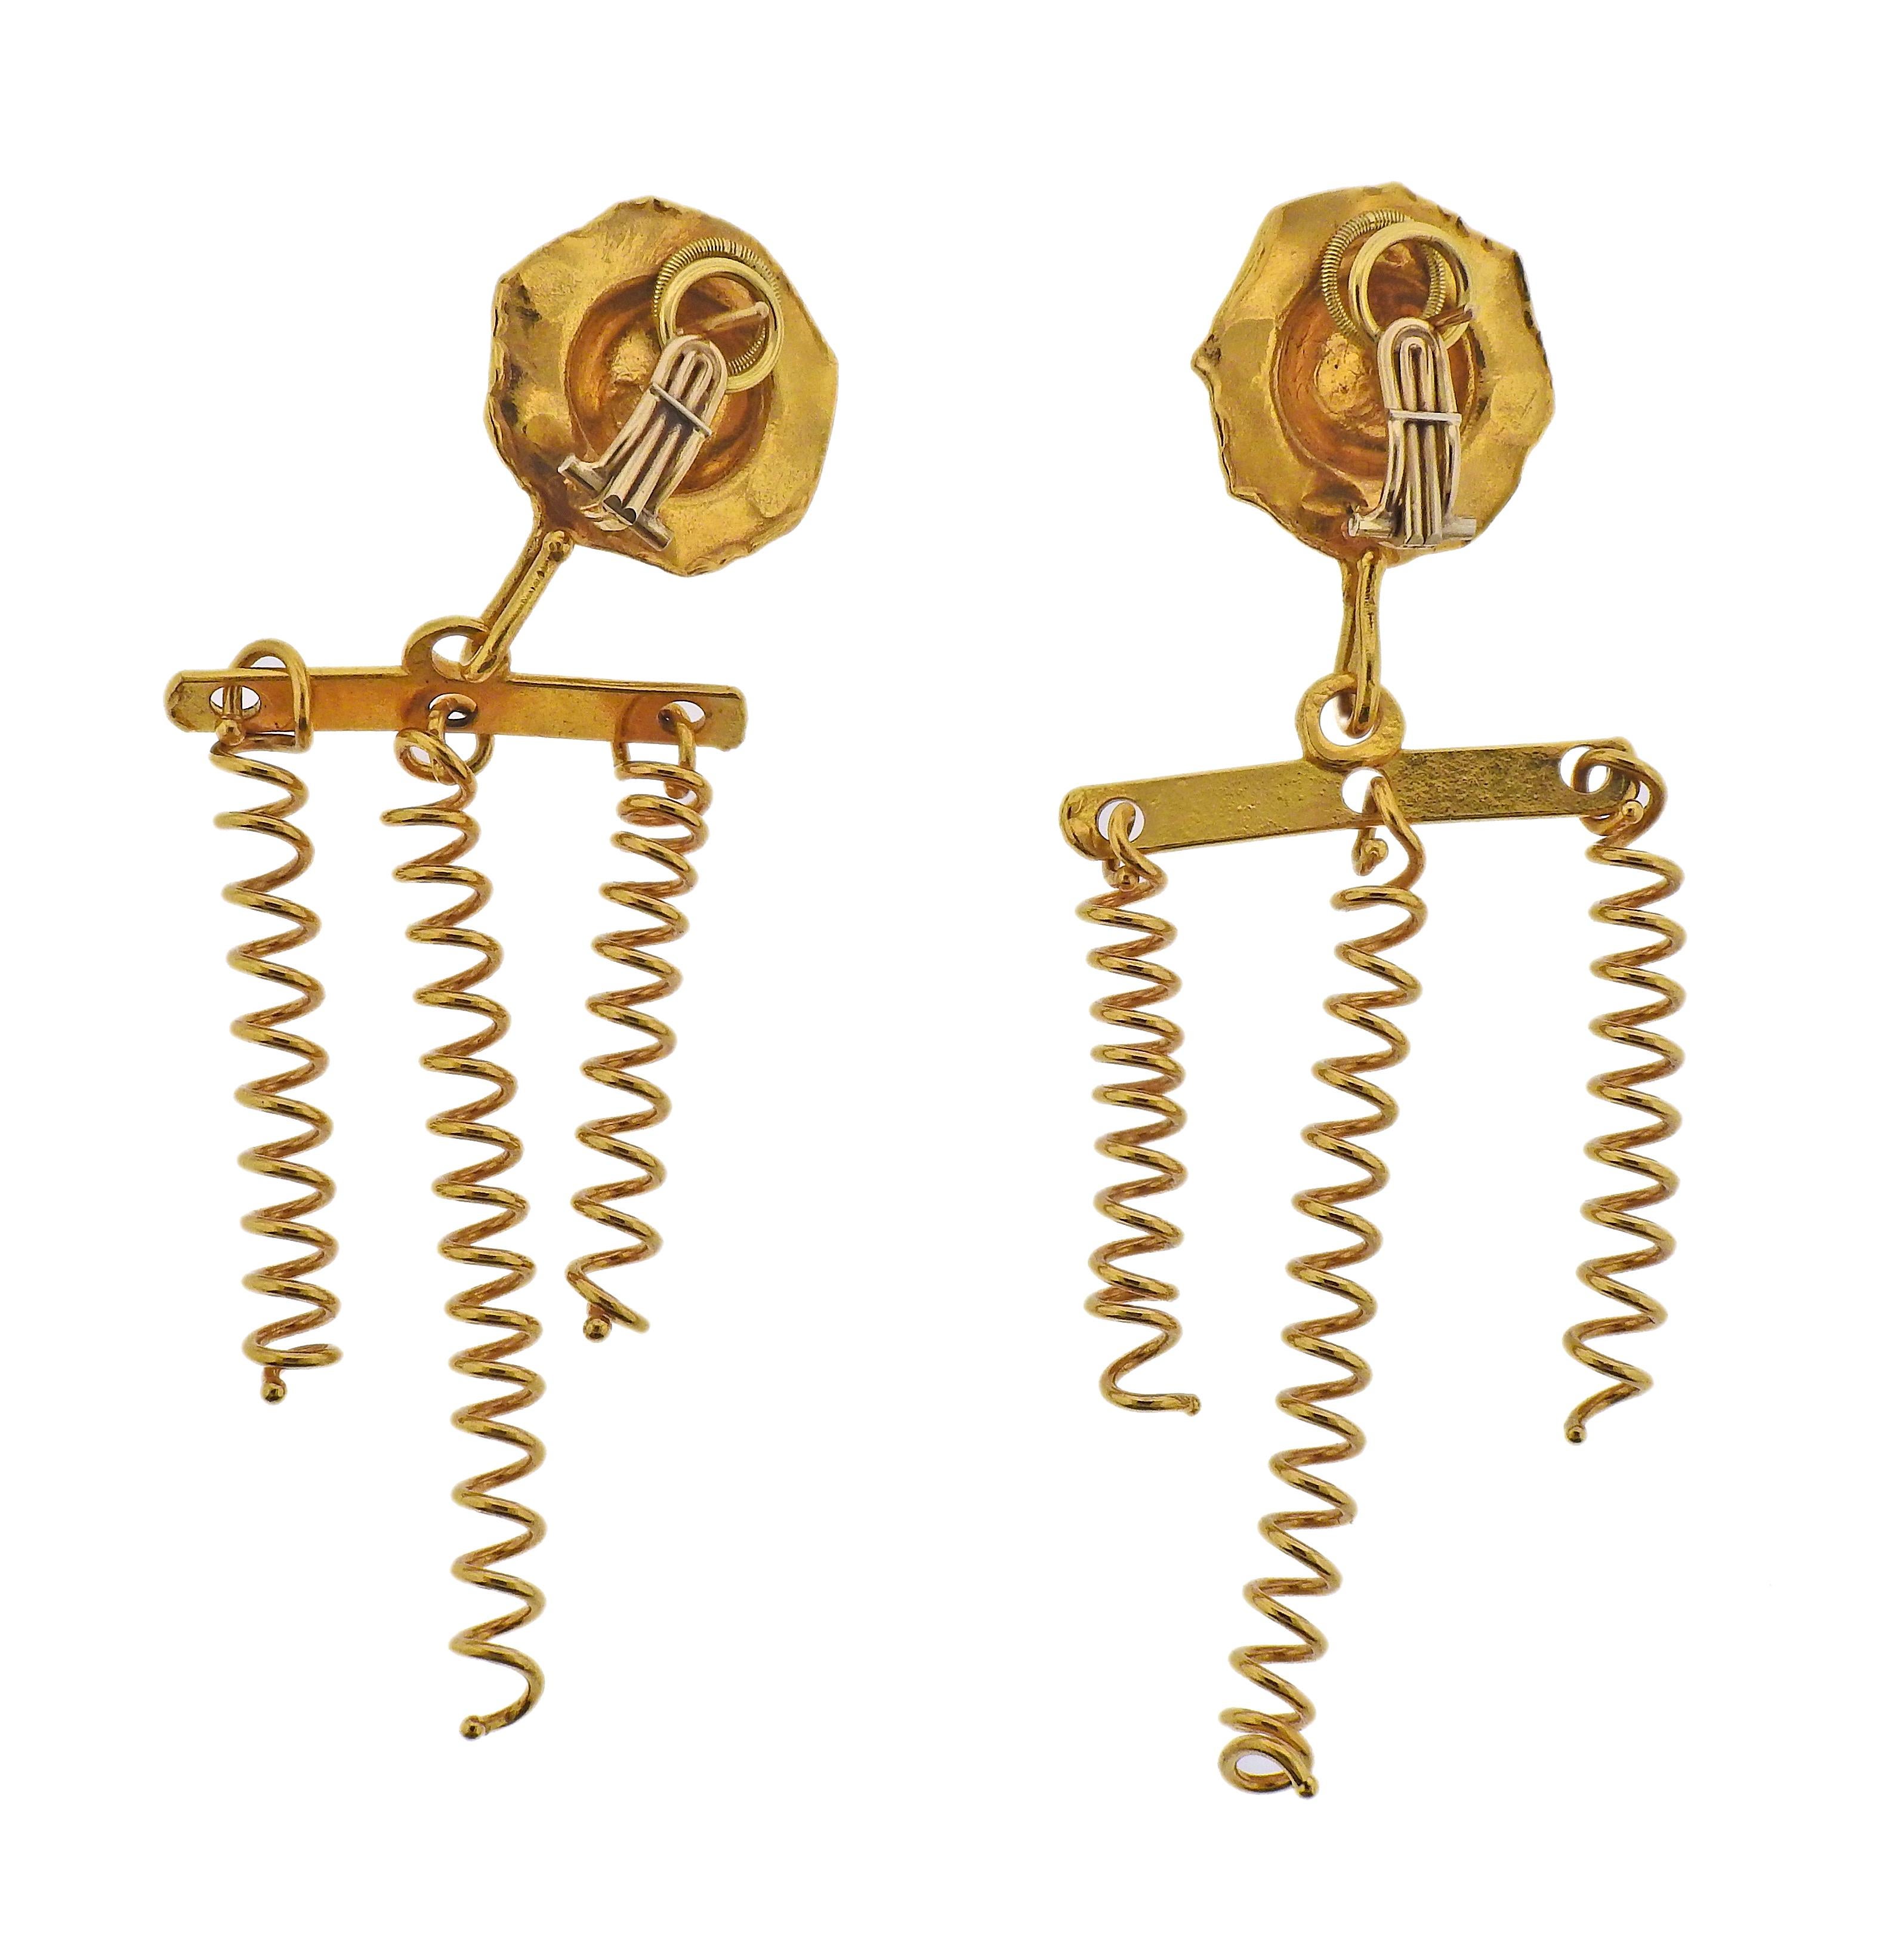 Pair of unique and whimsical spiral drop earrings by Jean Mahie, in 22k gold. Earrings measure 3 3/8